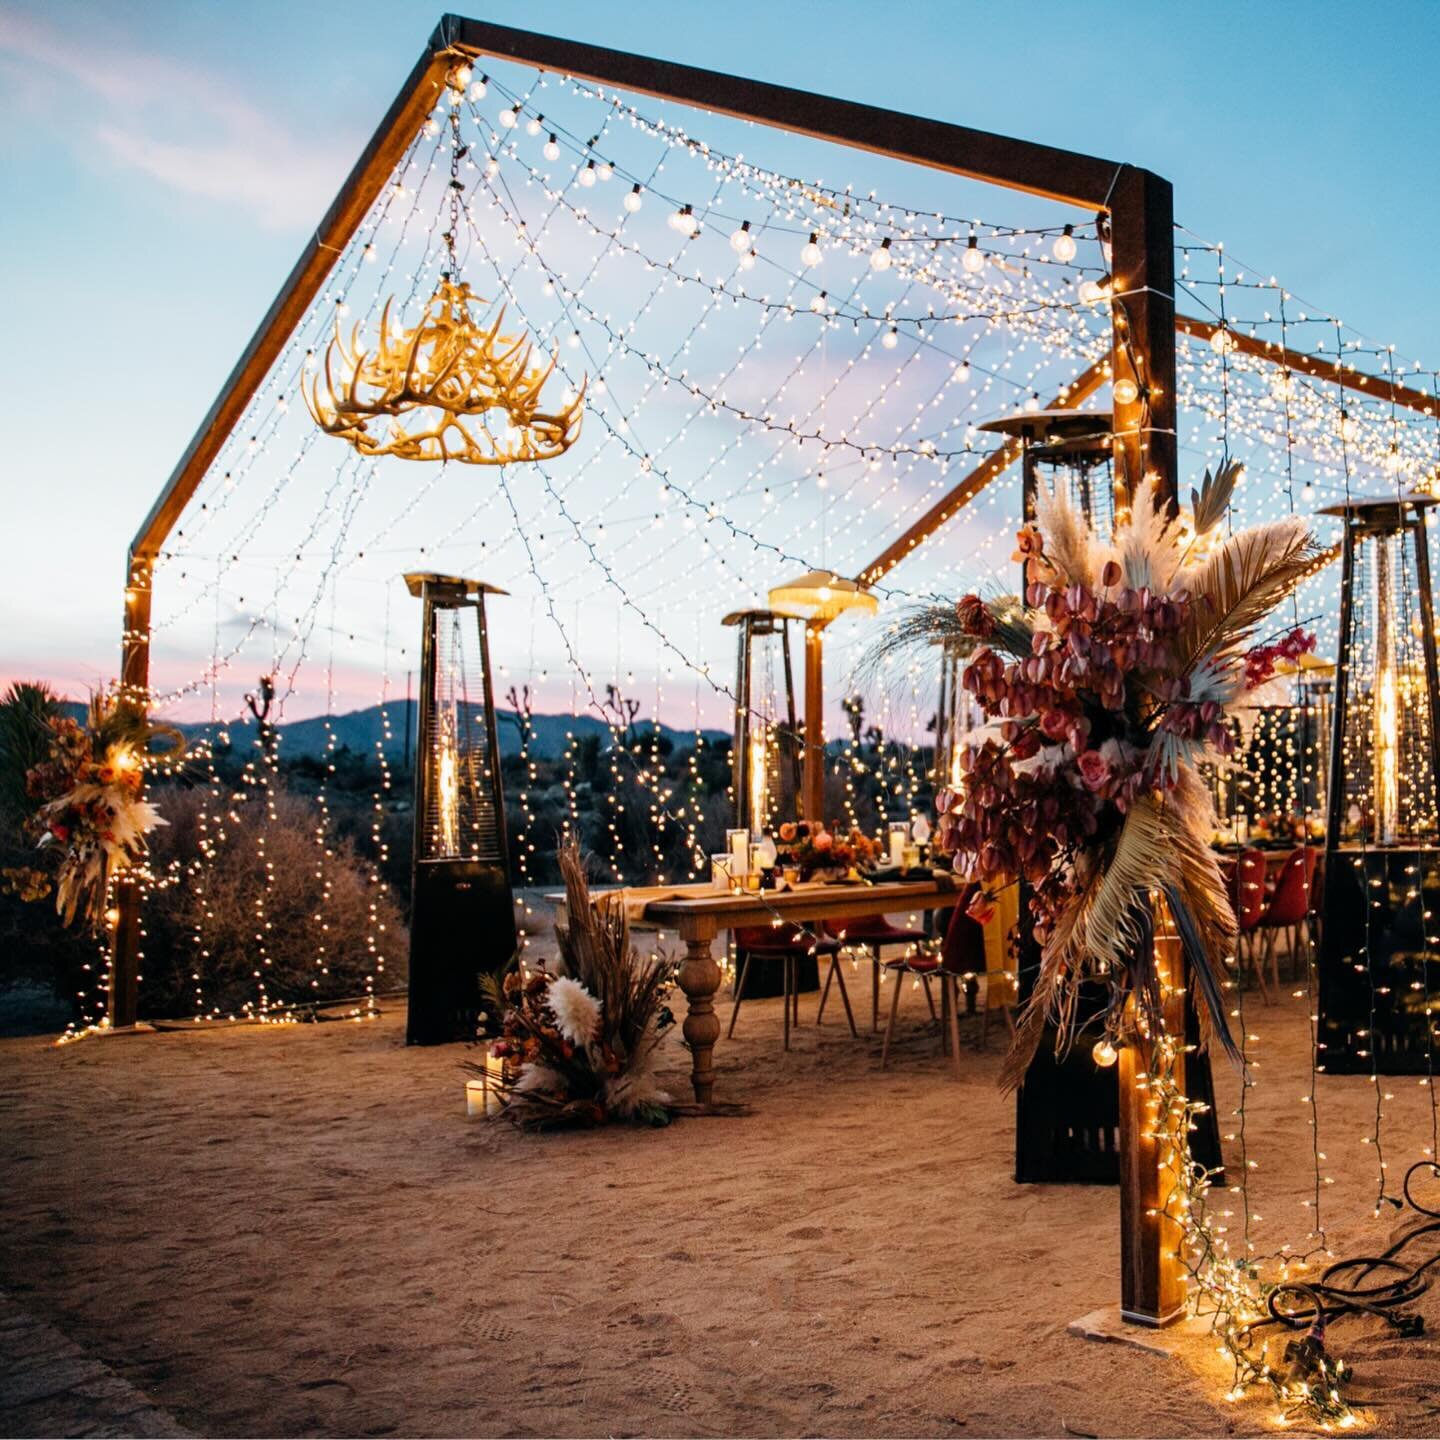 When the sun goes down, the party continues on! 

Photographer | @trishaharrisonphotography

#lighting #eventdetails #joshuatree #birthdayparty #eventplanner #rusticdesign #boho #antlers #chandelier #partydecor #ladylibertyevents #eventplanner #event